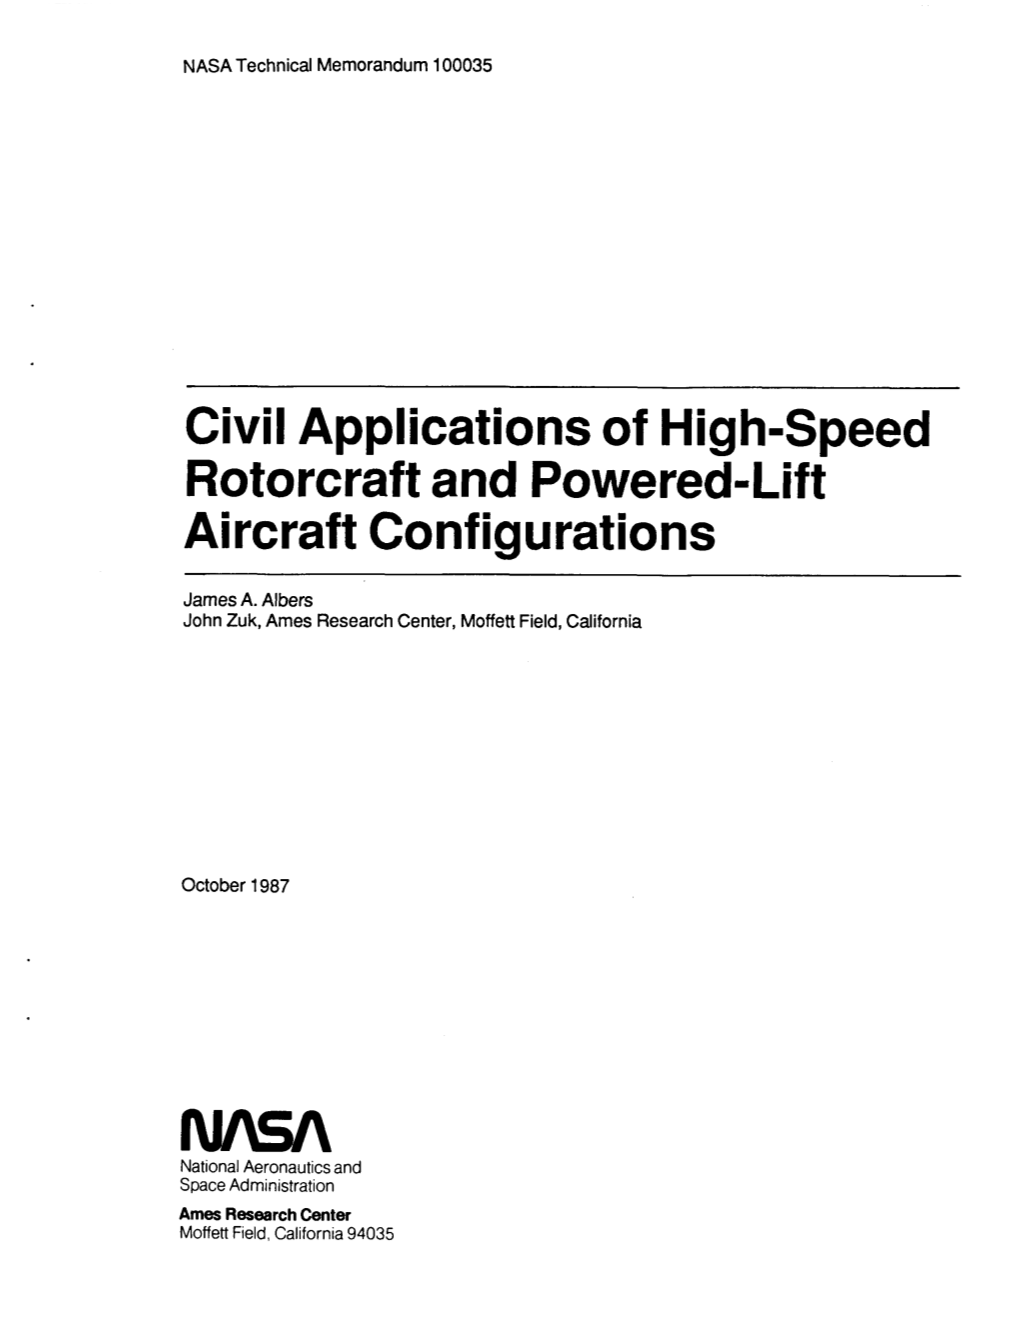 Civil Applications of High-Speed Rotorcraft and Powered-Lift Aircraft Configurations